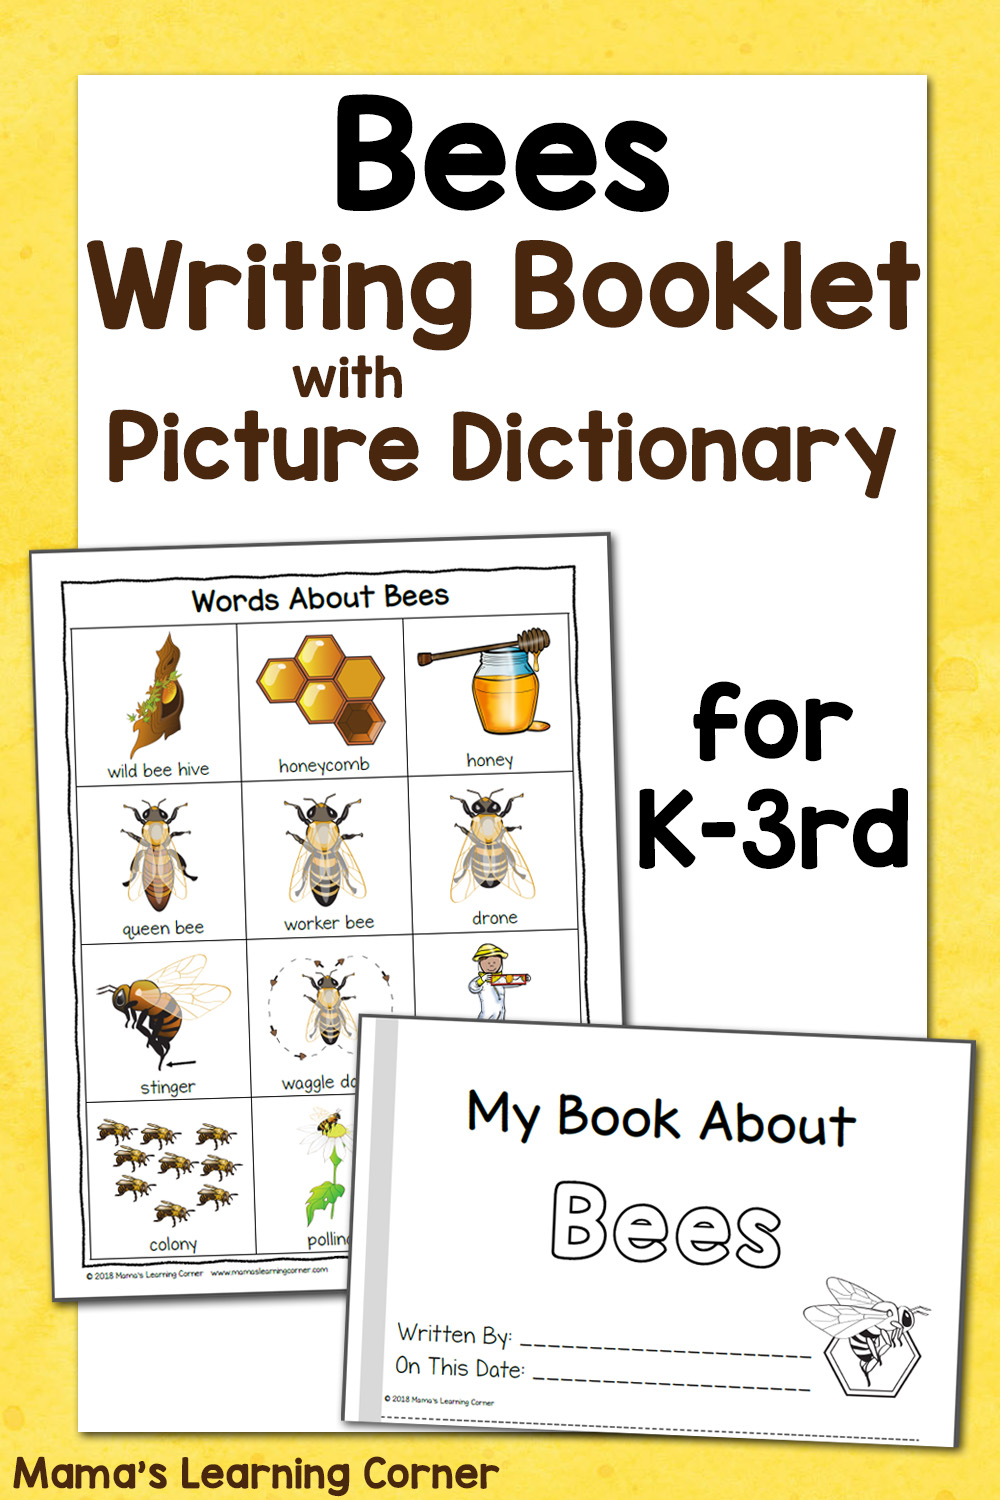 Bee Writing Booklet with Picture Dictionary